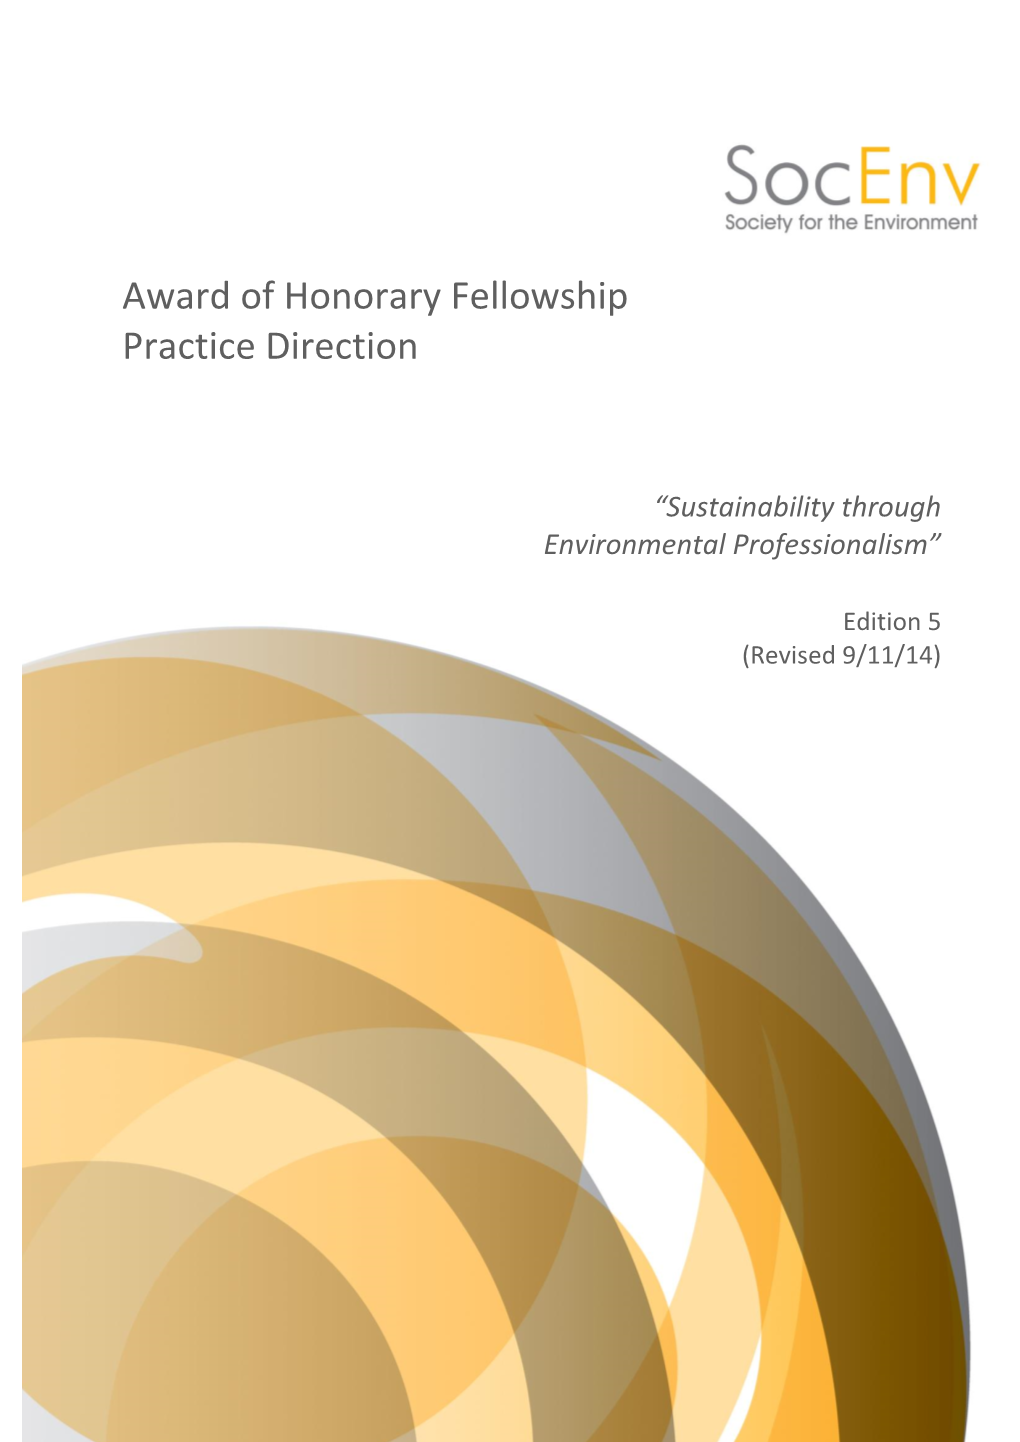 Award of Honorary Fellowship Practice Direction